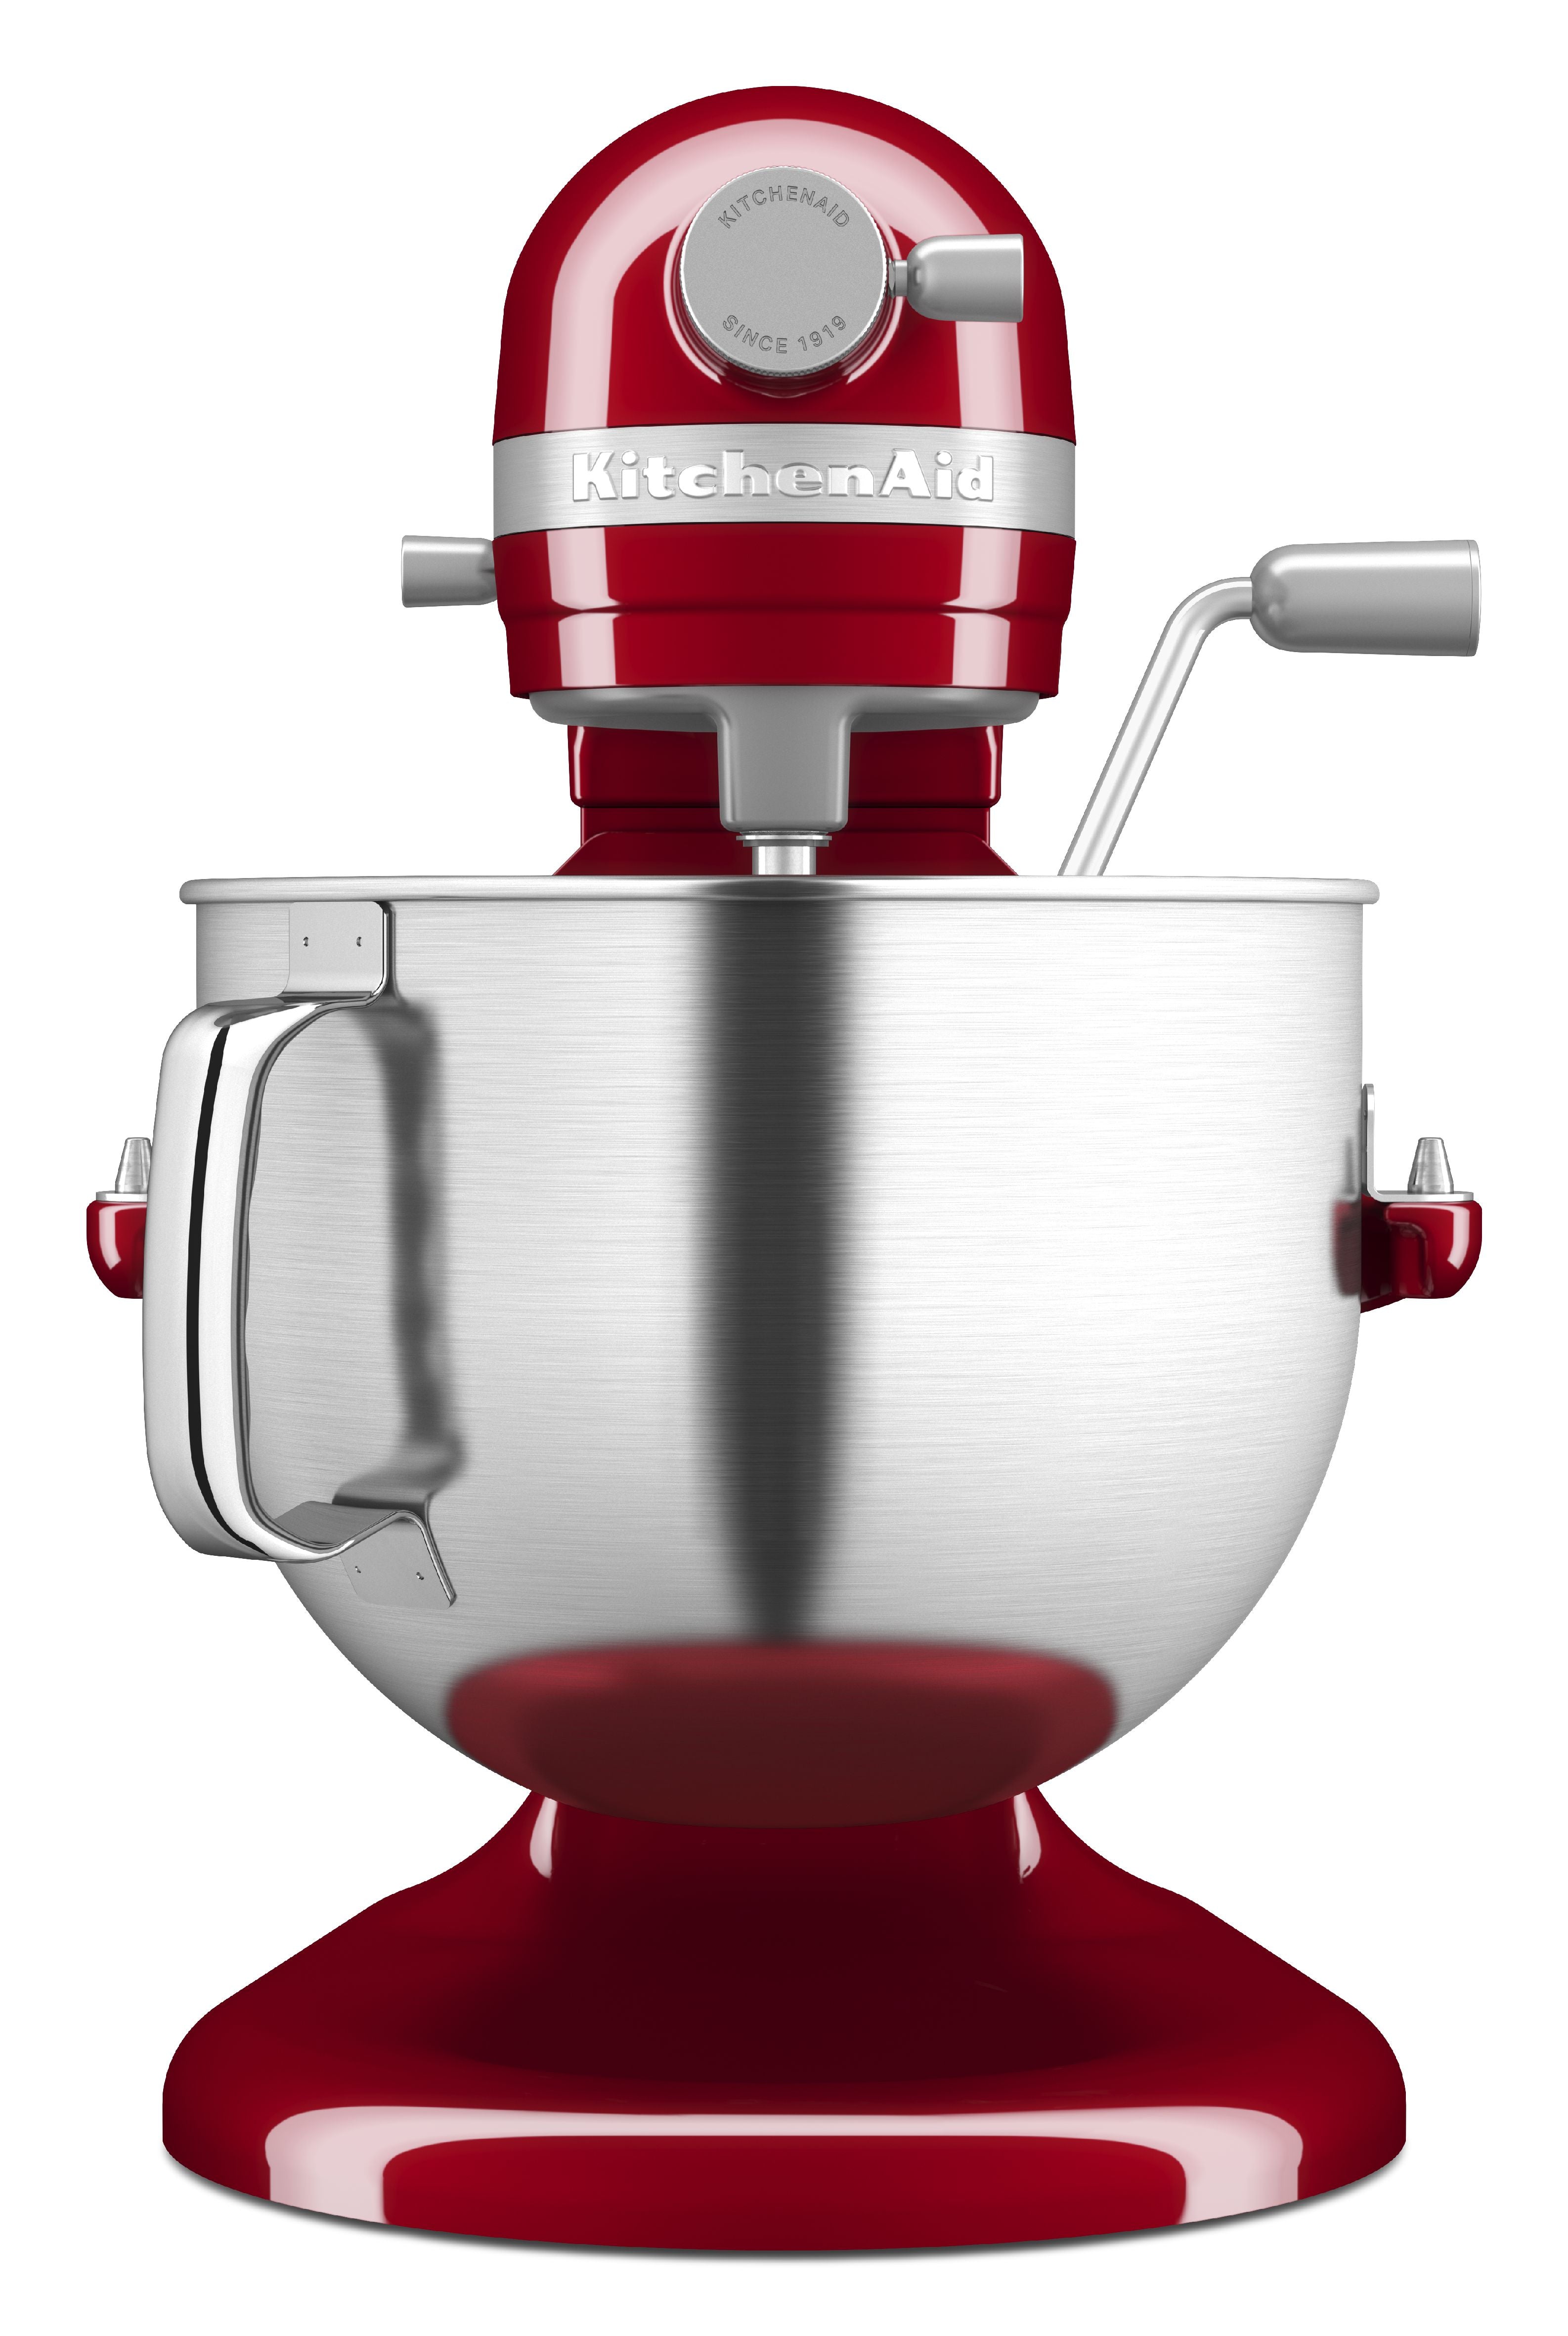 Kitchen Aid Artisan Bowl Lift Stand Mixer 6.6 L, Empired Red